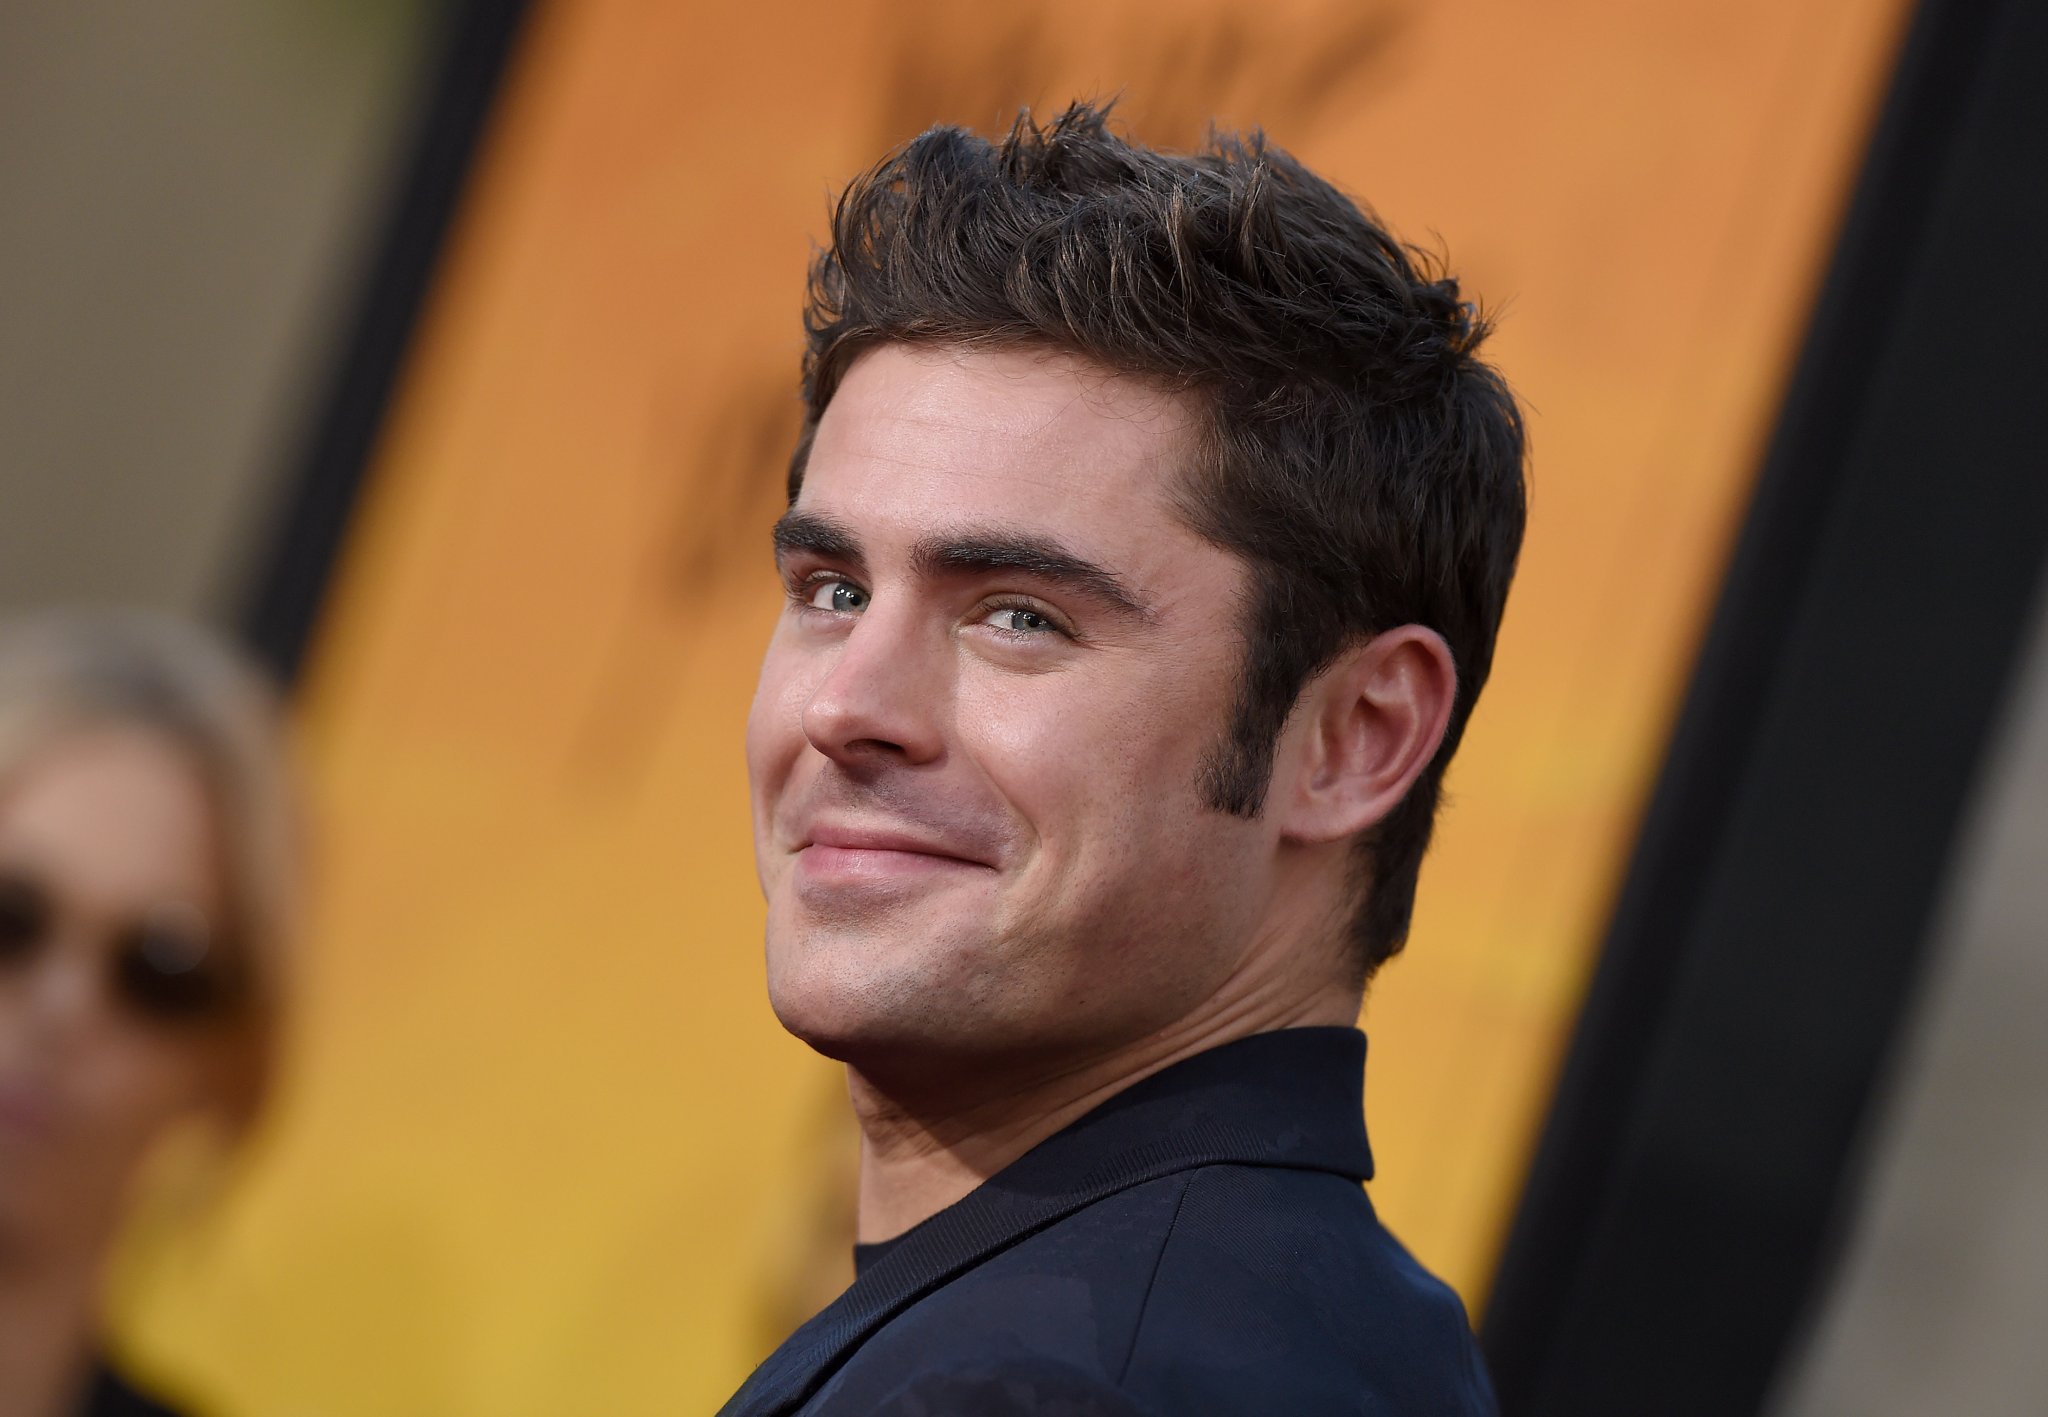 The Internet Reacts To Zac Efron's Face Looking Nearly Unrecognizable In New Video - BroBible